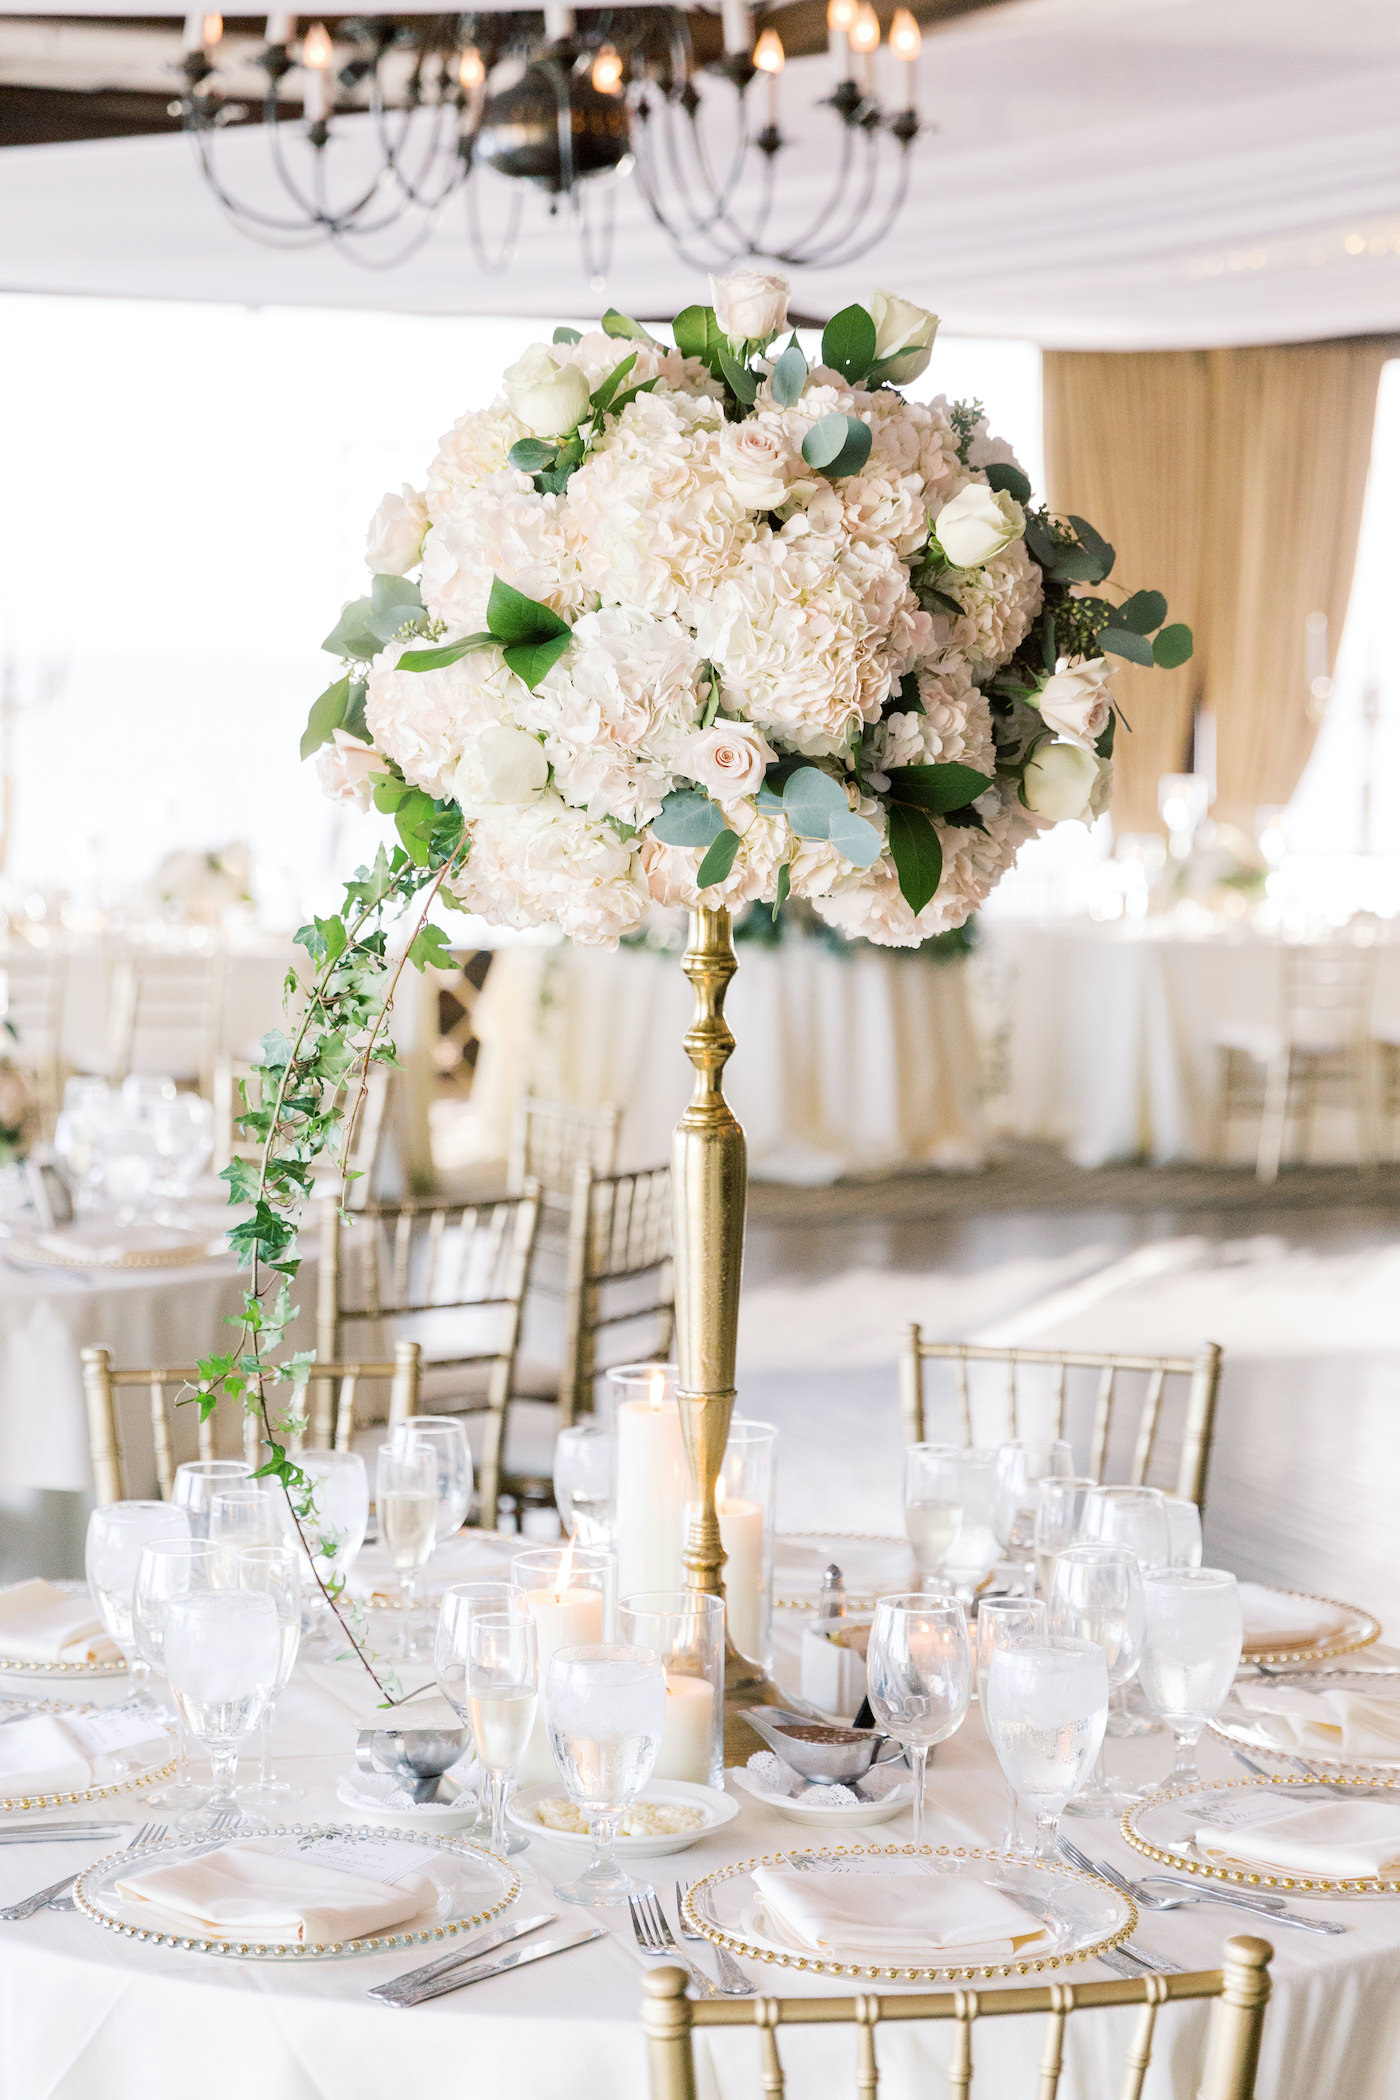 Classic Elegant Wedding Reception Decor, Tall Floral Centerpiece, Gold Candelabra with White Hydrangeas, Blush Pink Roses, Eucalyptus and Greenery Centerpiece | Tampa Bay Wedding Planner Special Moments Event Planning | Wedding Florist, Candelabra and Chargers Rentals Gabro Event Services